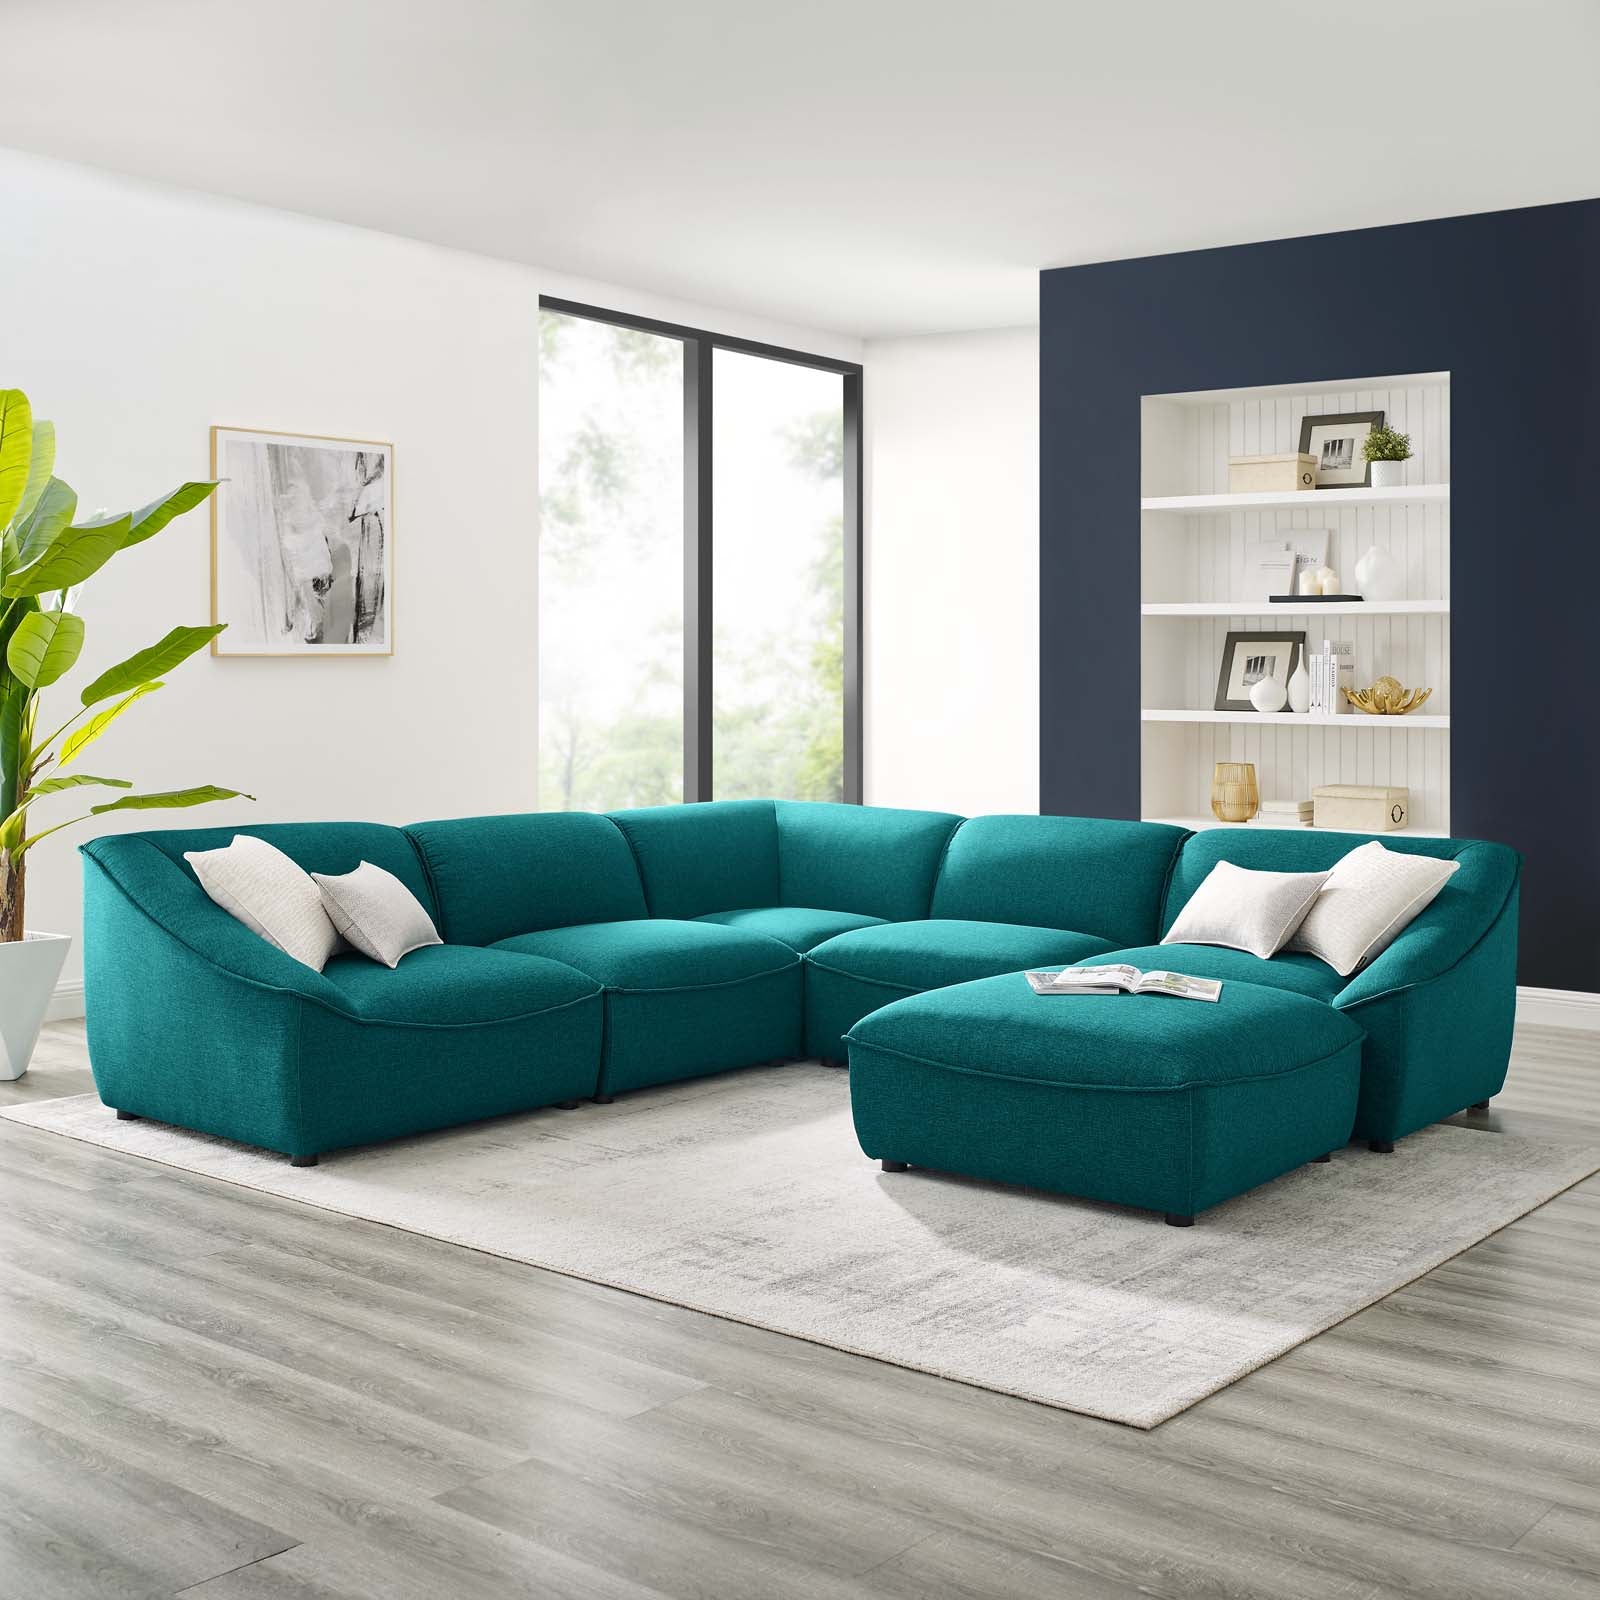 Comprise 6-Piece Sectional Sofa